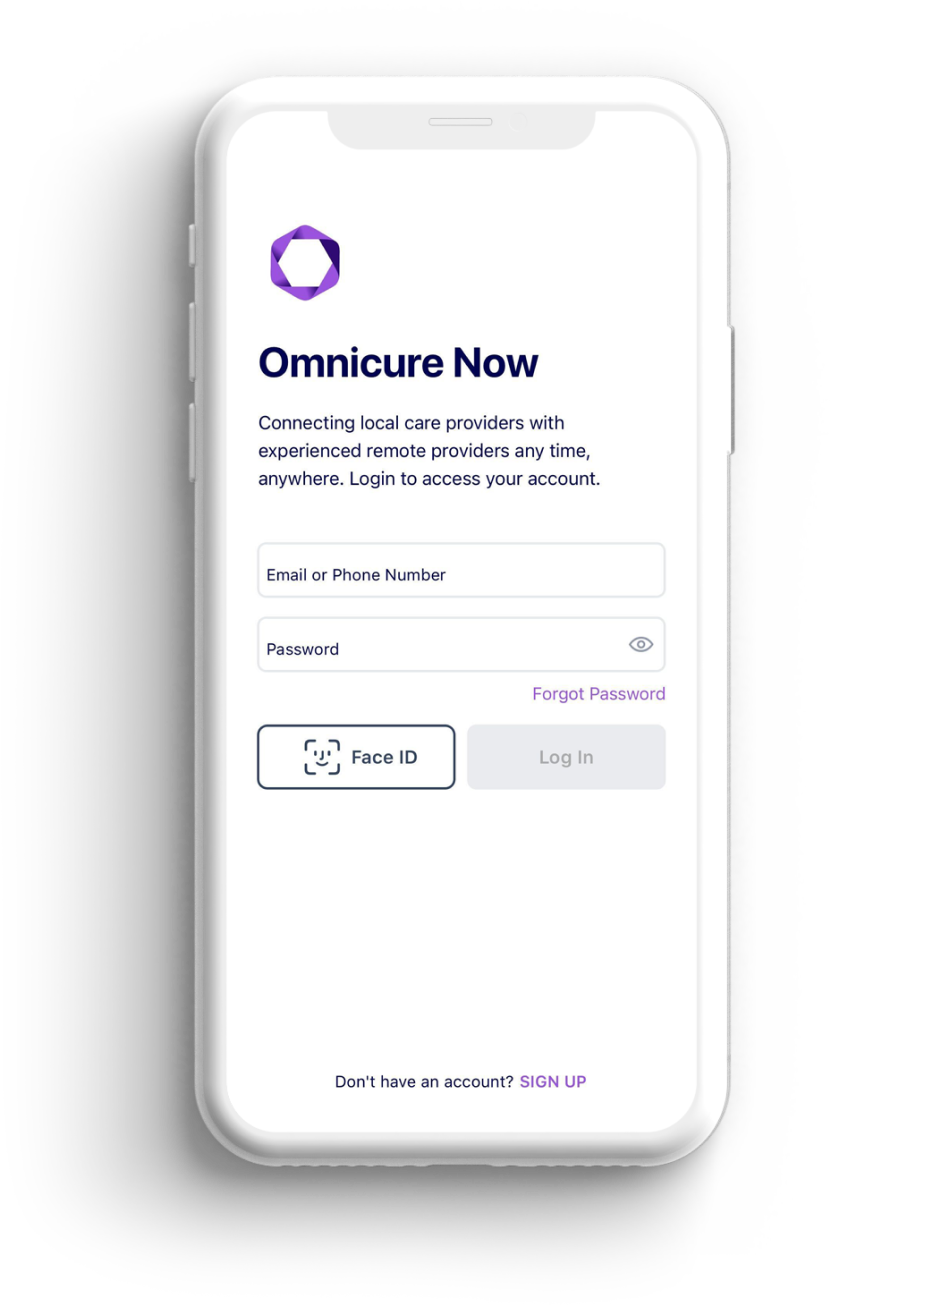 Omnicure Now iOS application